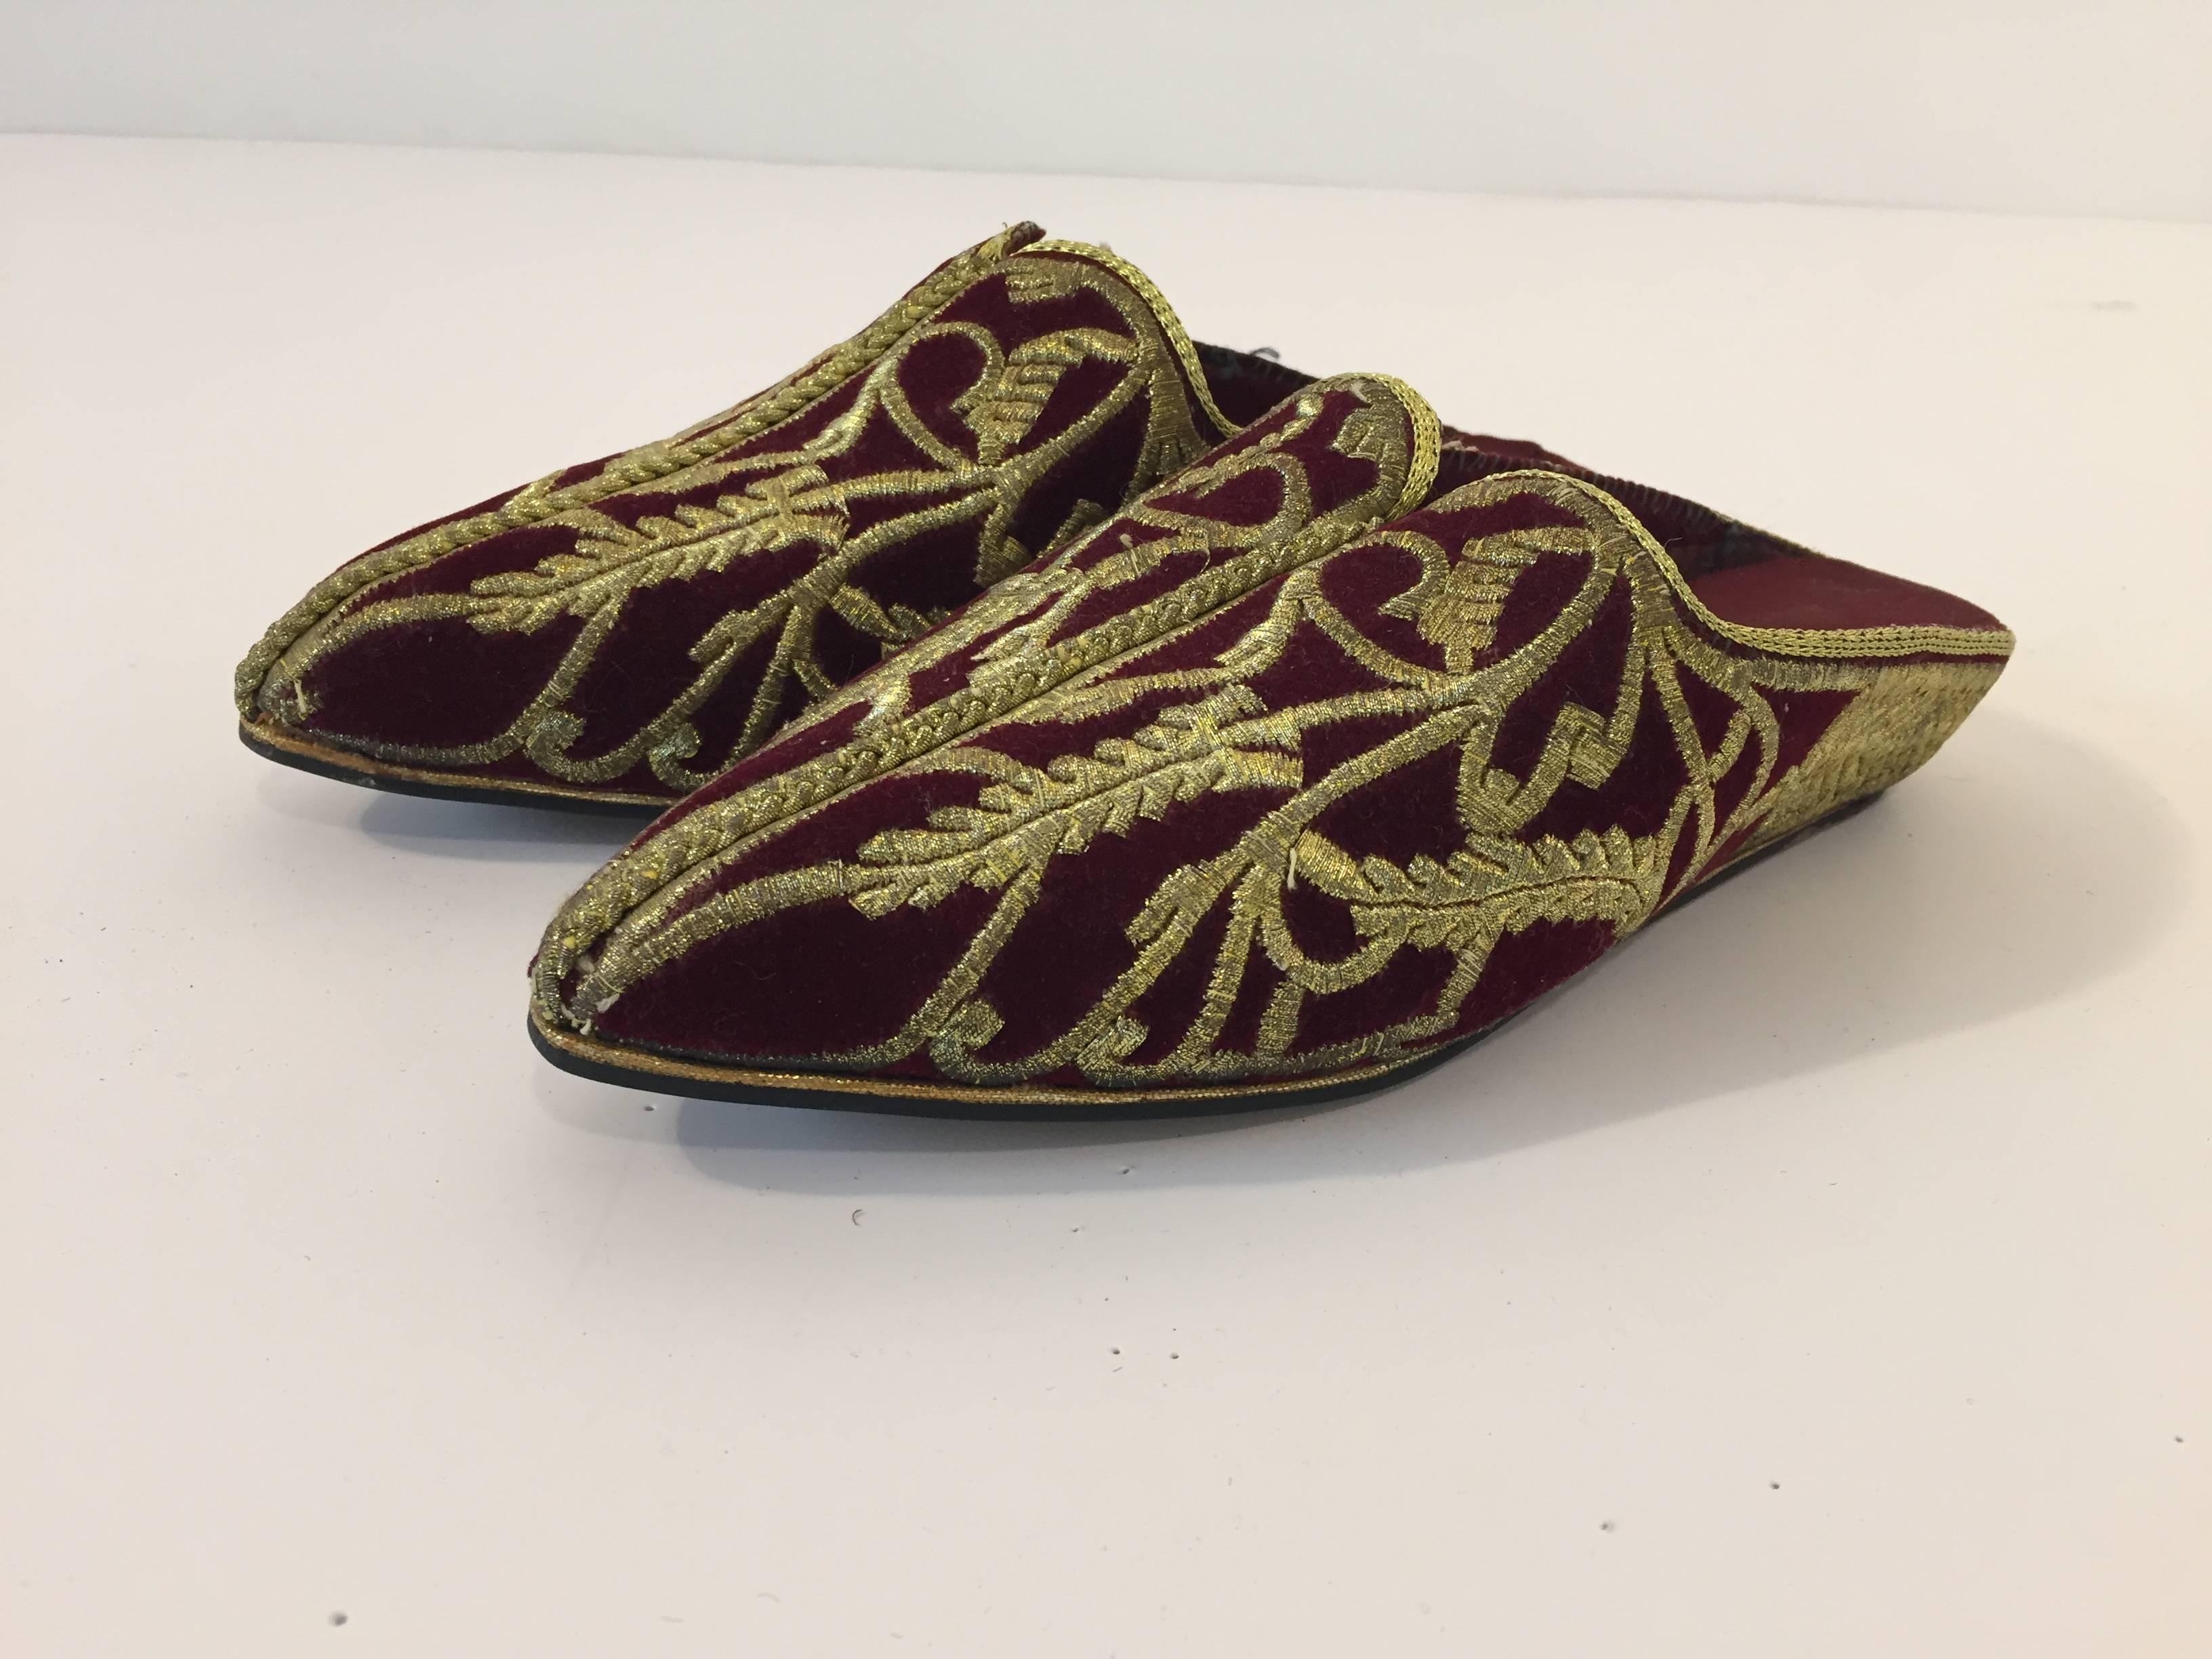 Vintage velvet burgundy embroidered pointed toe Middle Eastern Moorish exotic shoes.
Embroidered Turkish metallic gold thread ethnic flat slippers.
Late-Ottoman style velvet shoes decorated with traditional embroidery gold work.
Size 8 US European 38